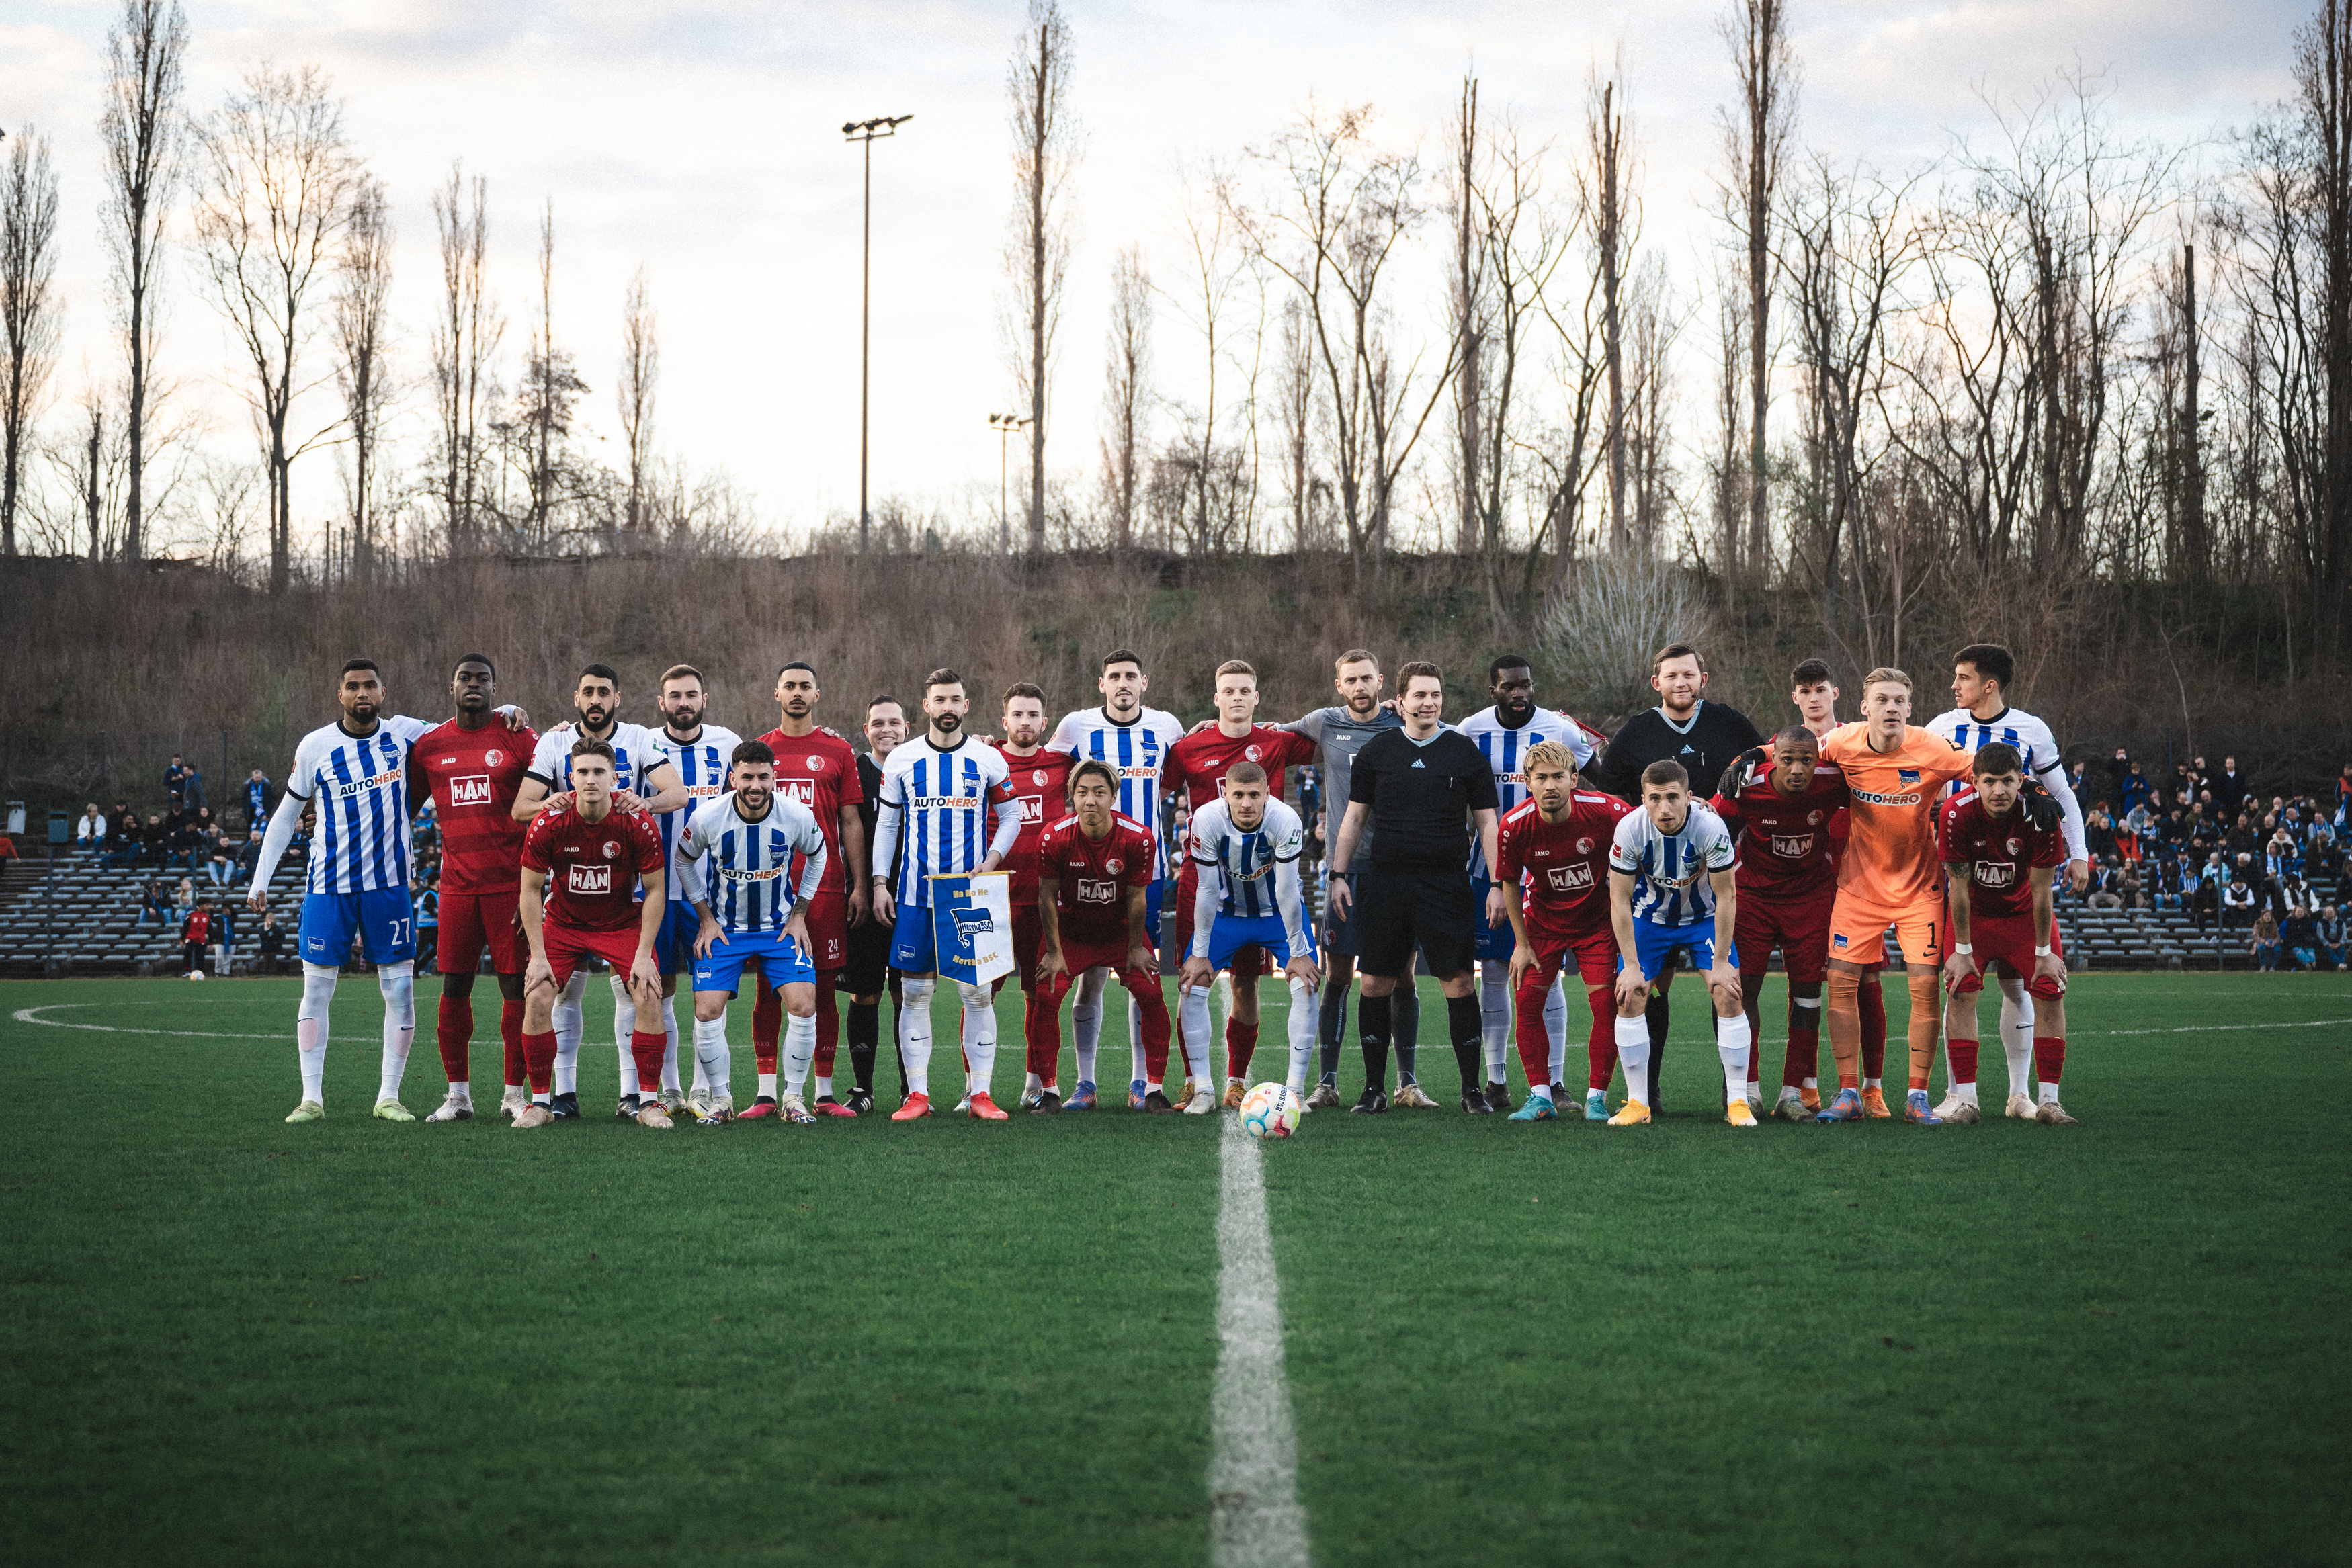 Berliner AK and Hertha BSC pose for a group photo before the game.